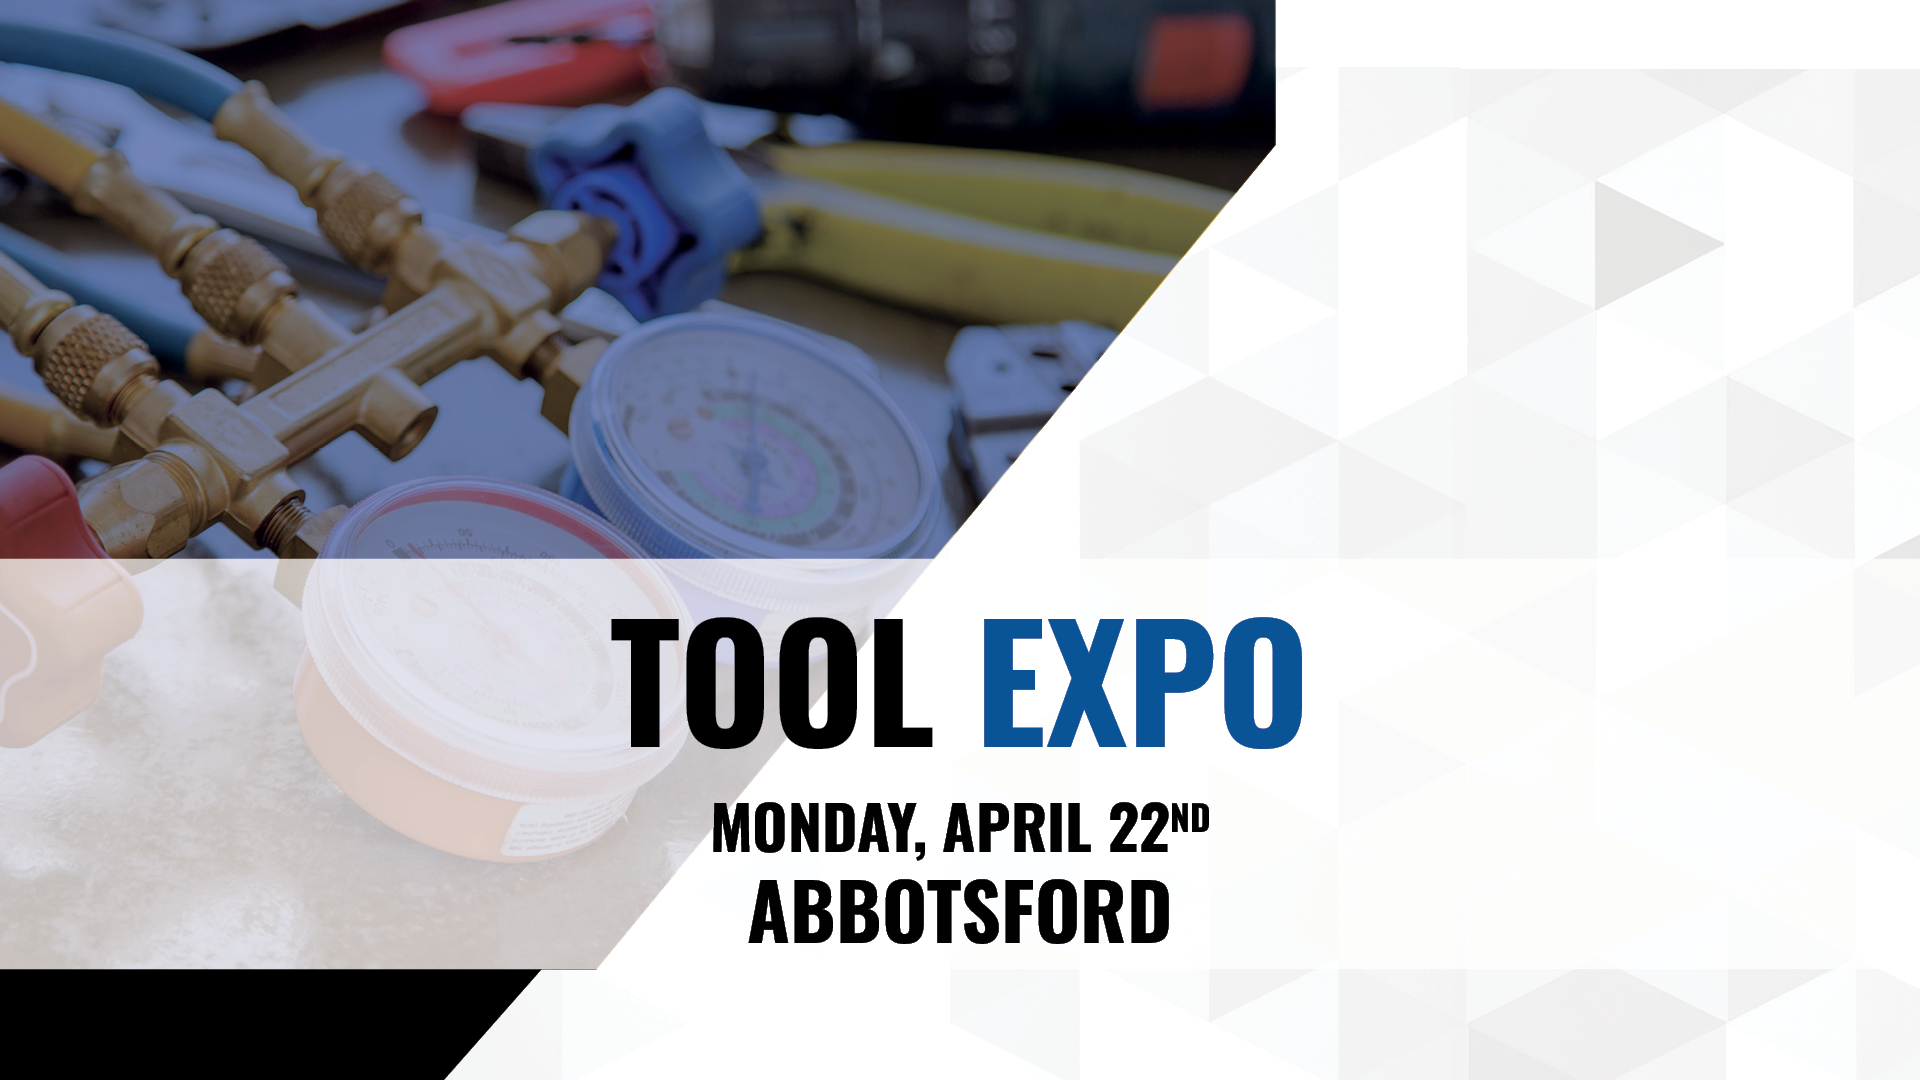  Tool Expo Tradeshow in Abbotsford